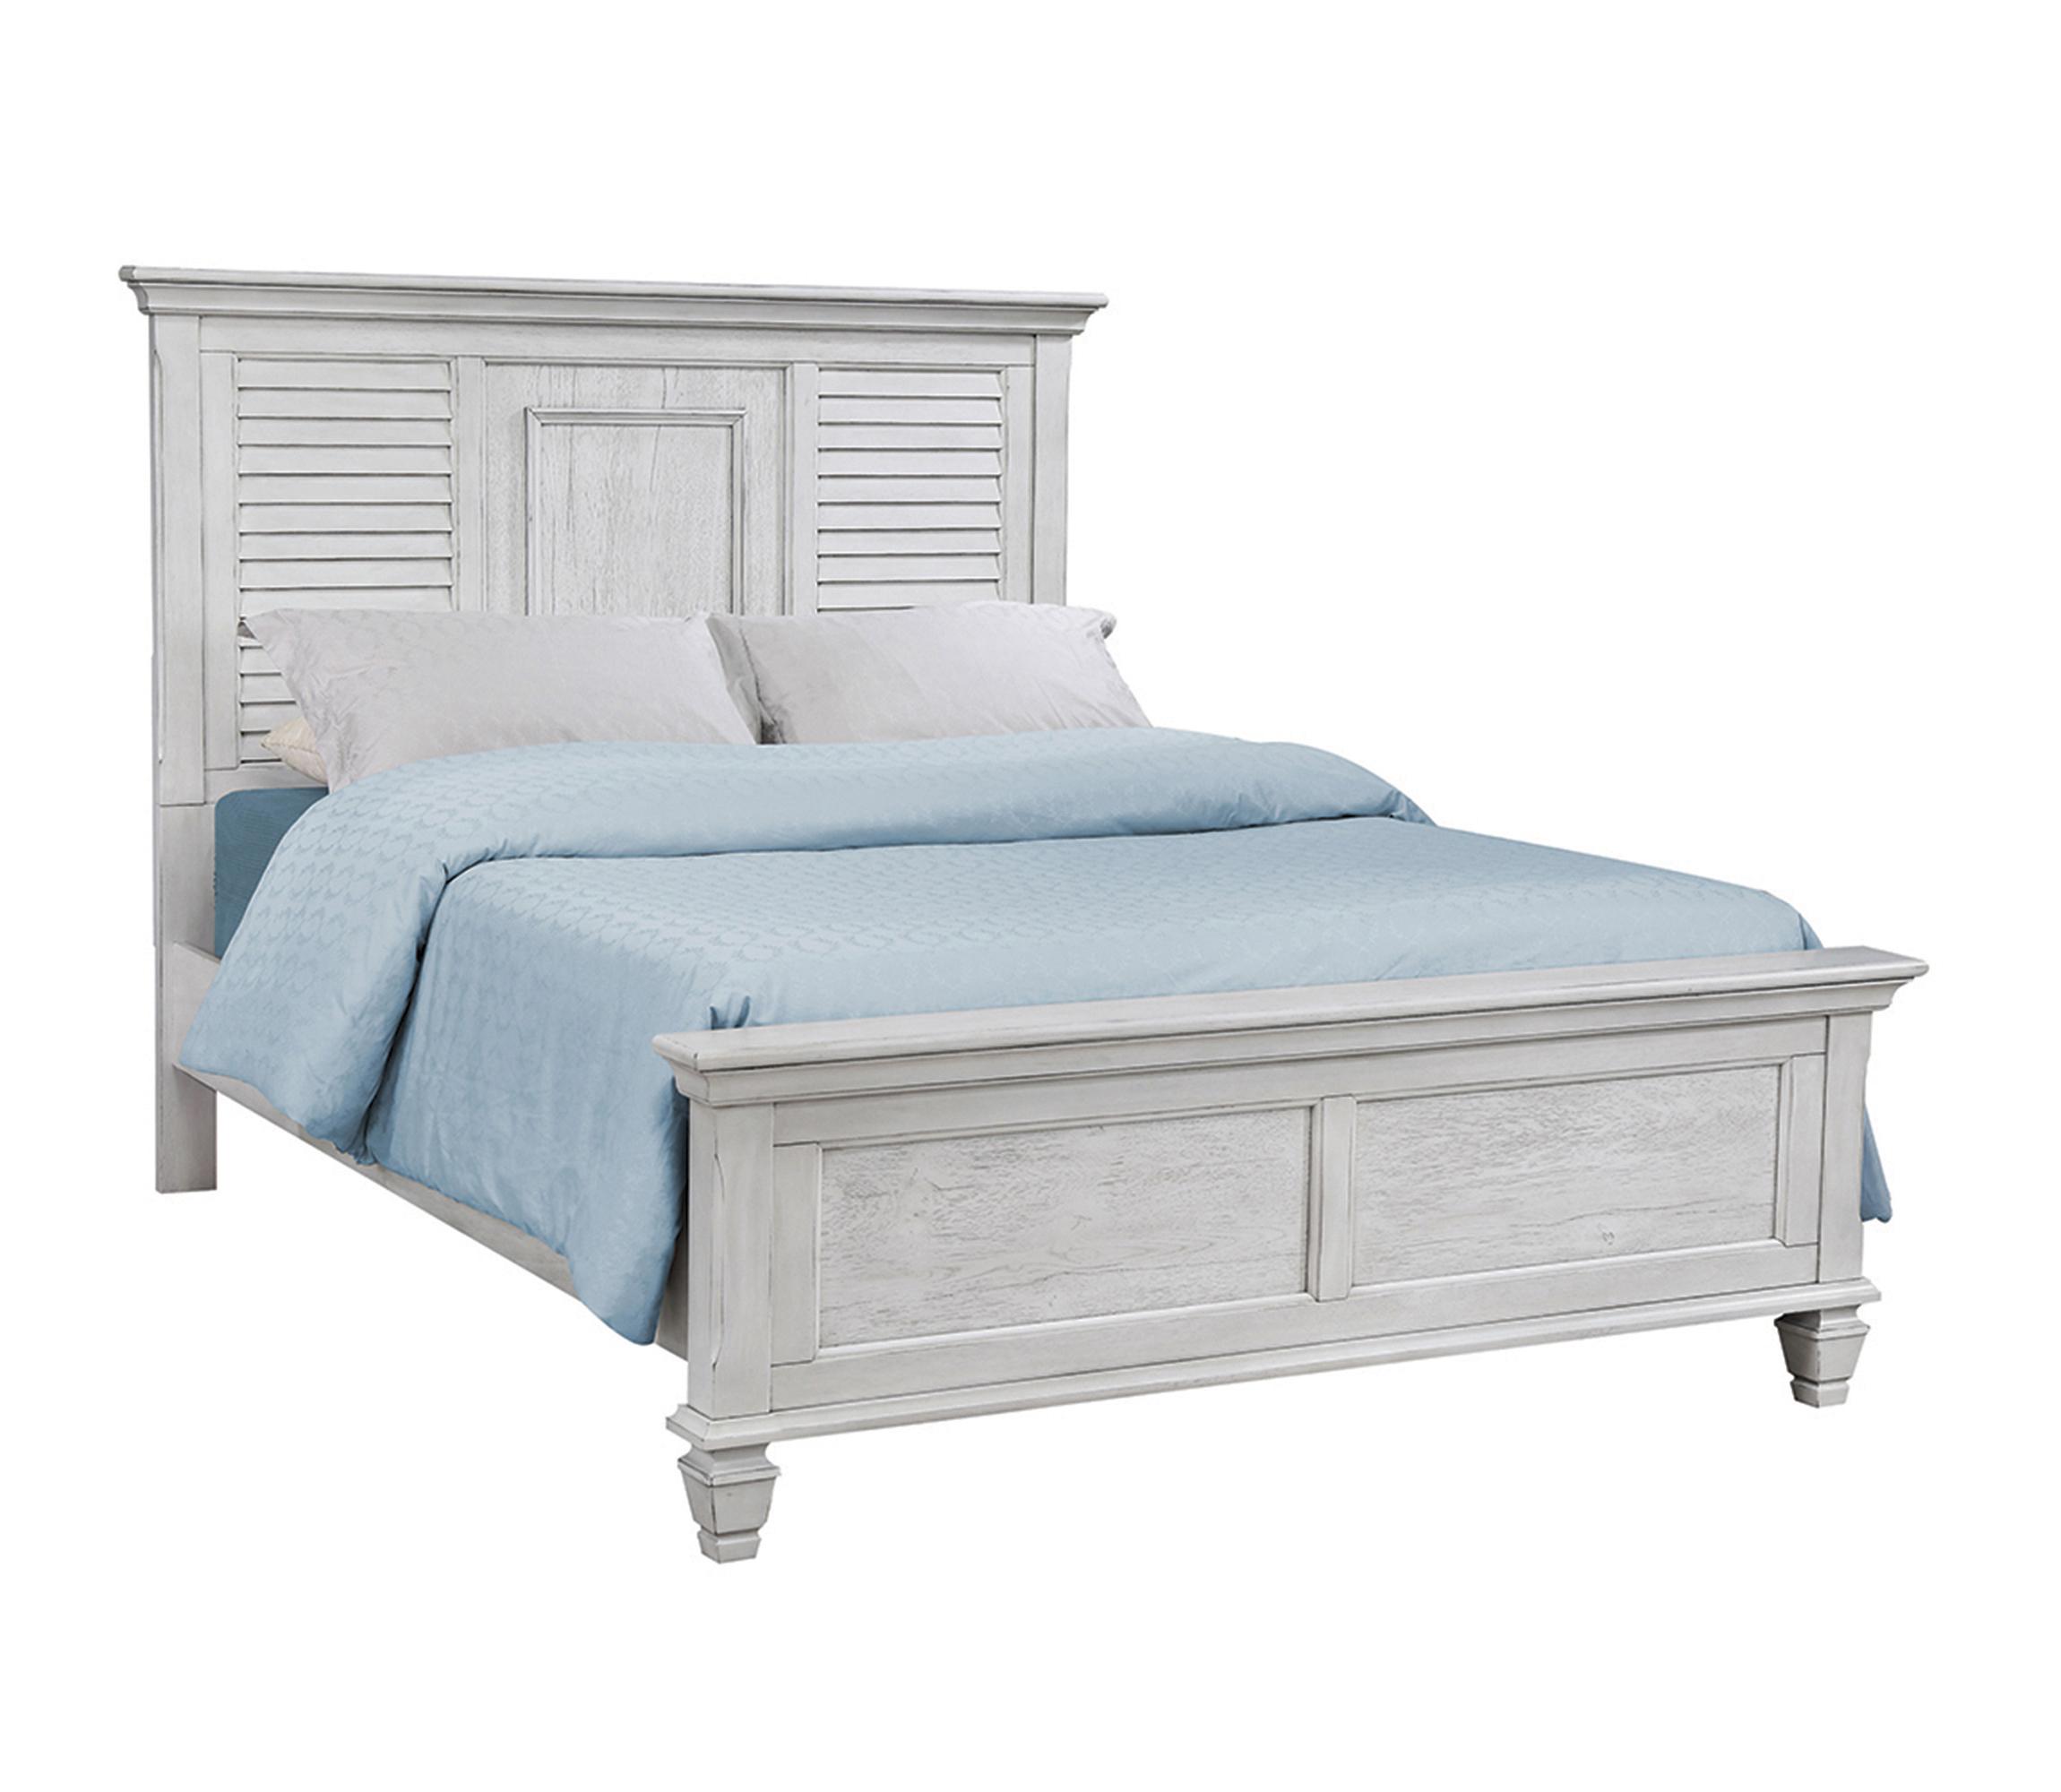 Transitional Bed 205331KW Franco 205331KW in Antique White 